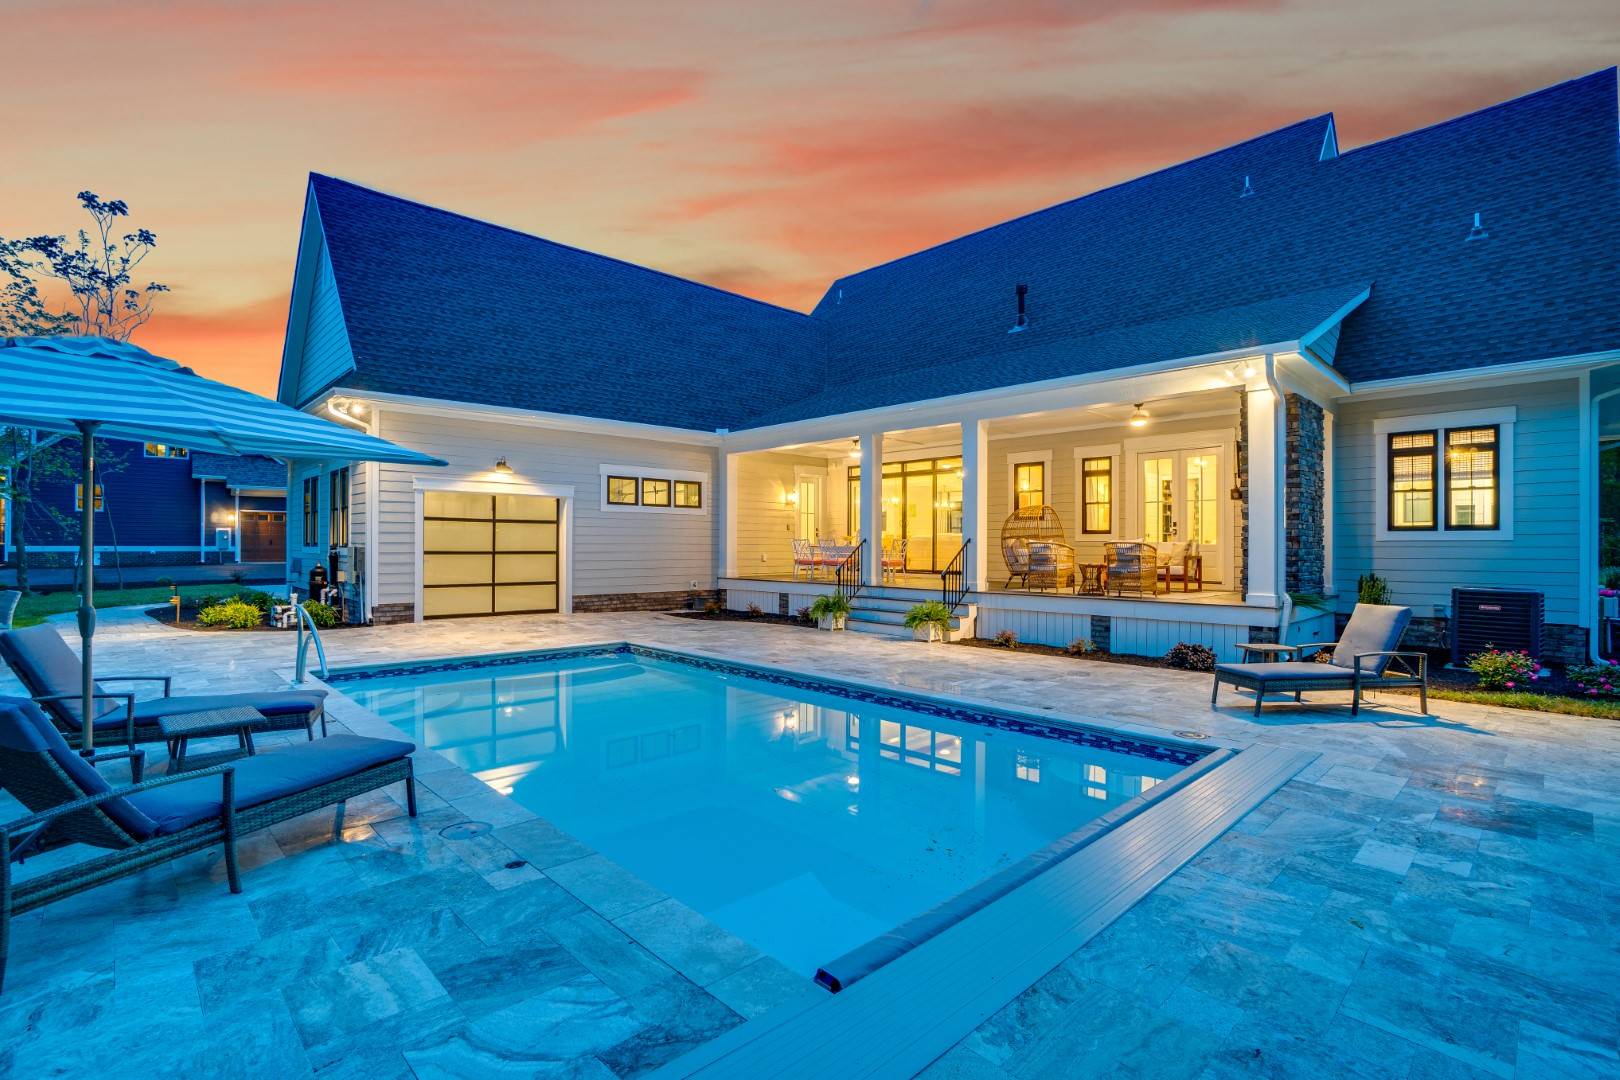 Perfect Evening Rear View featuring Rear Porch and Pool image of Ruth Ann House Plan